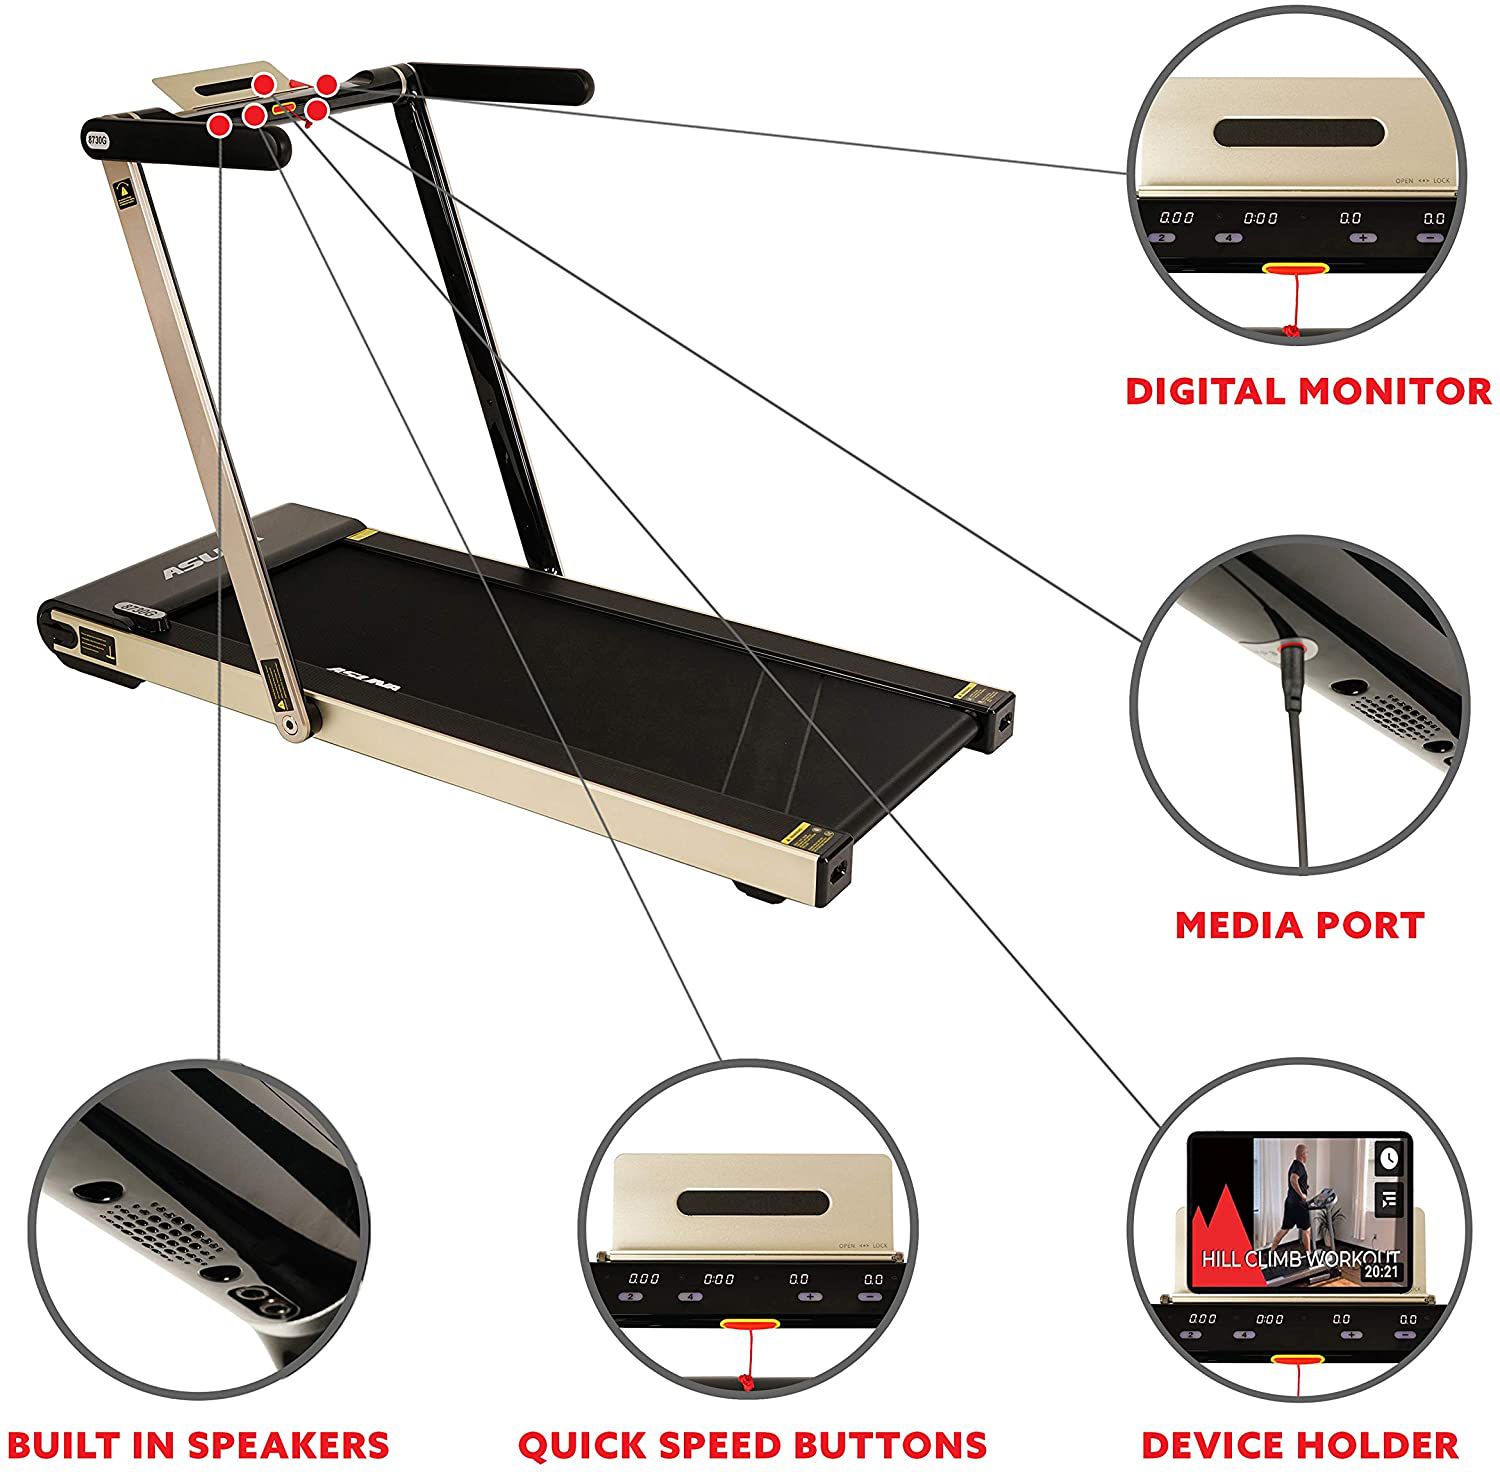 Sunny Health & Fitness ASUNA Premium Slim Folding Treadmill Running Machine  with Speakers for Home Gyms